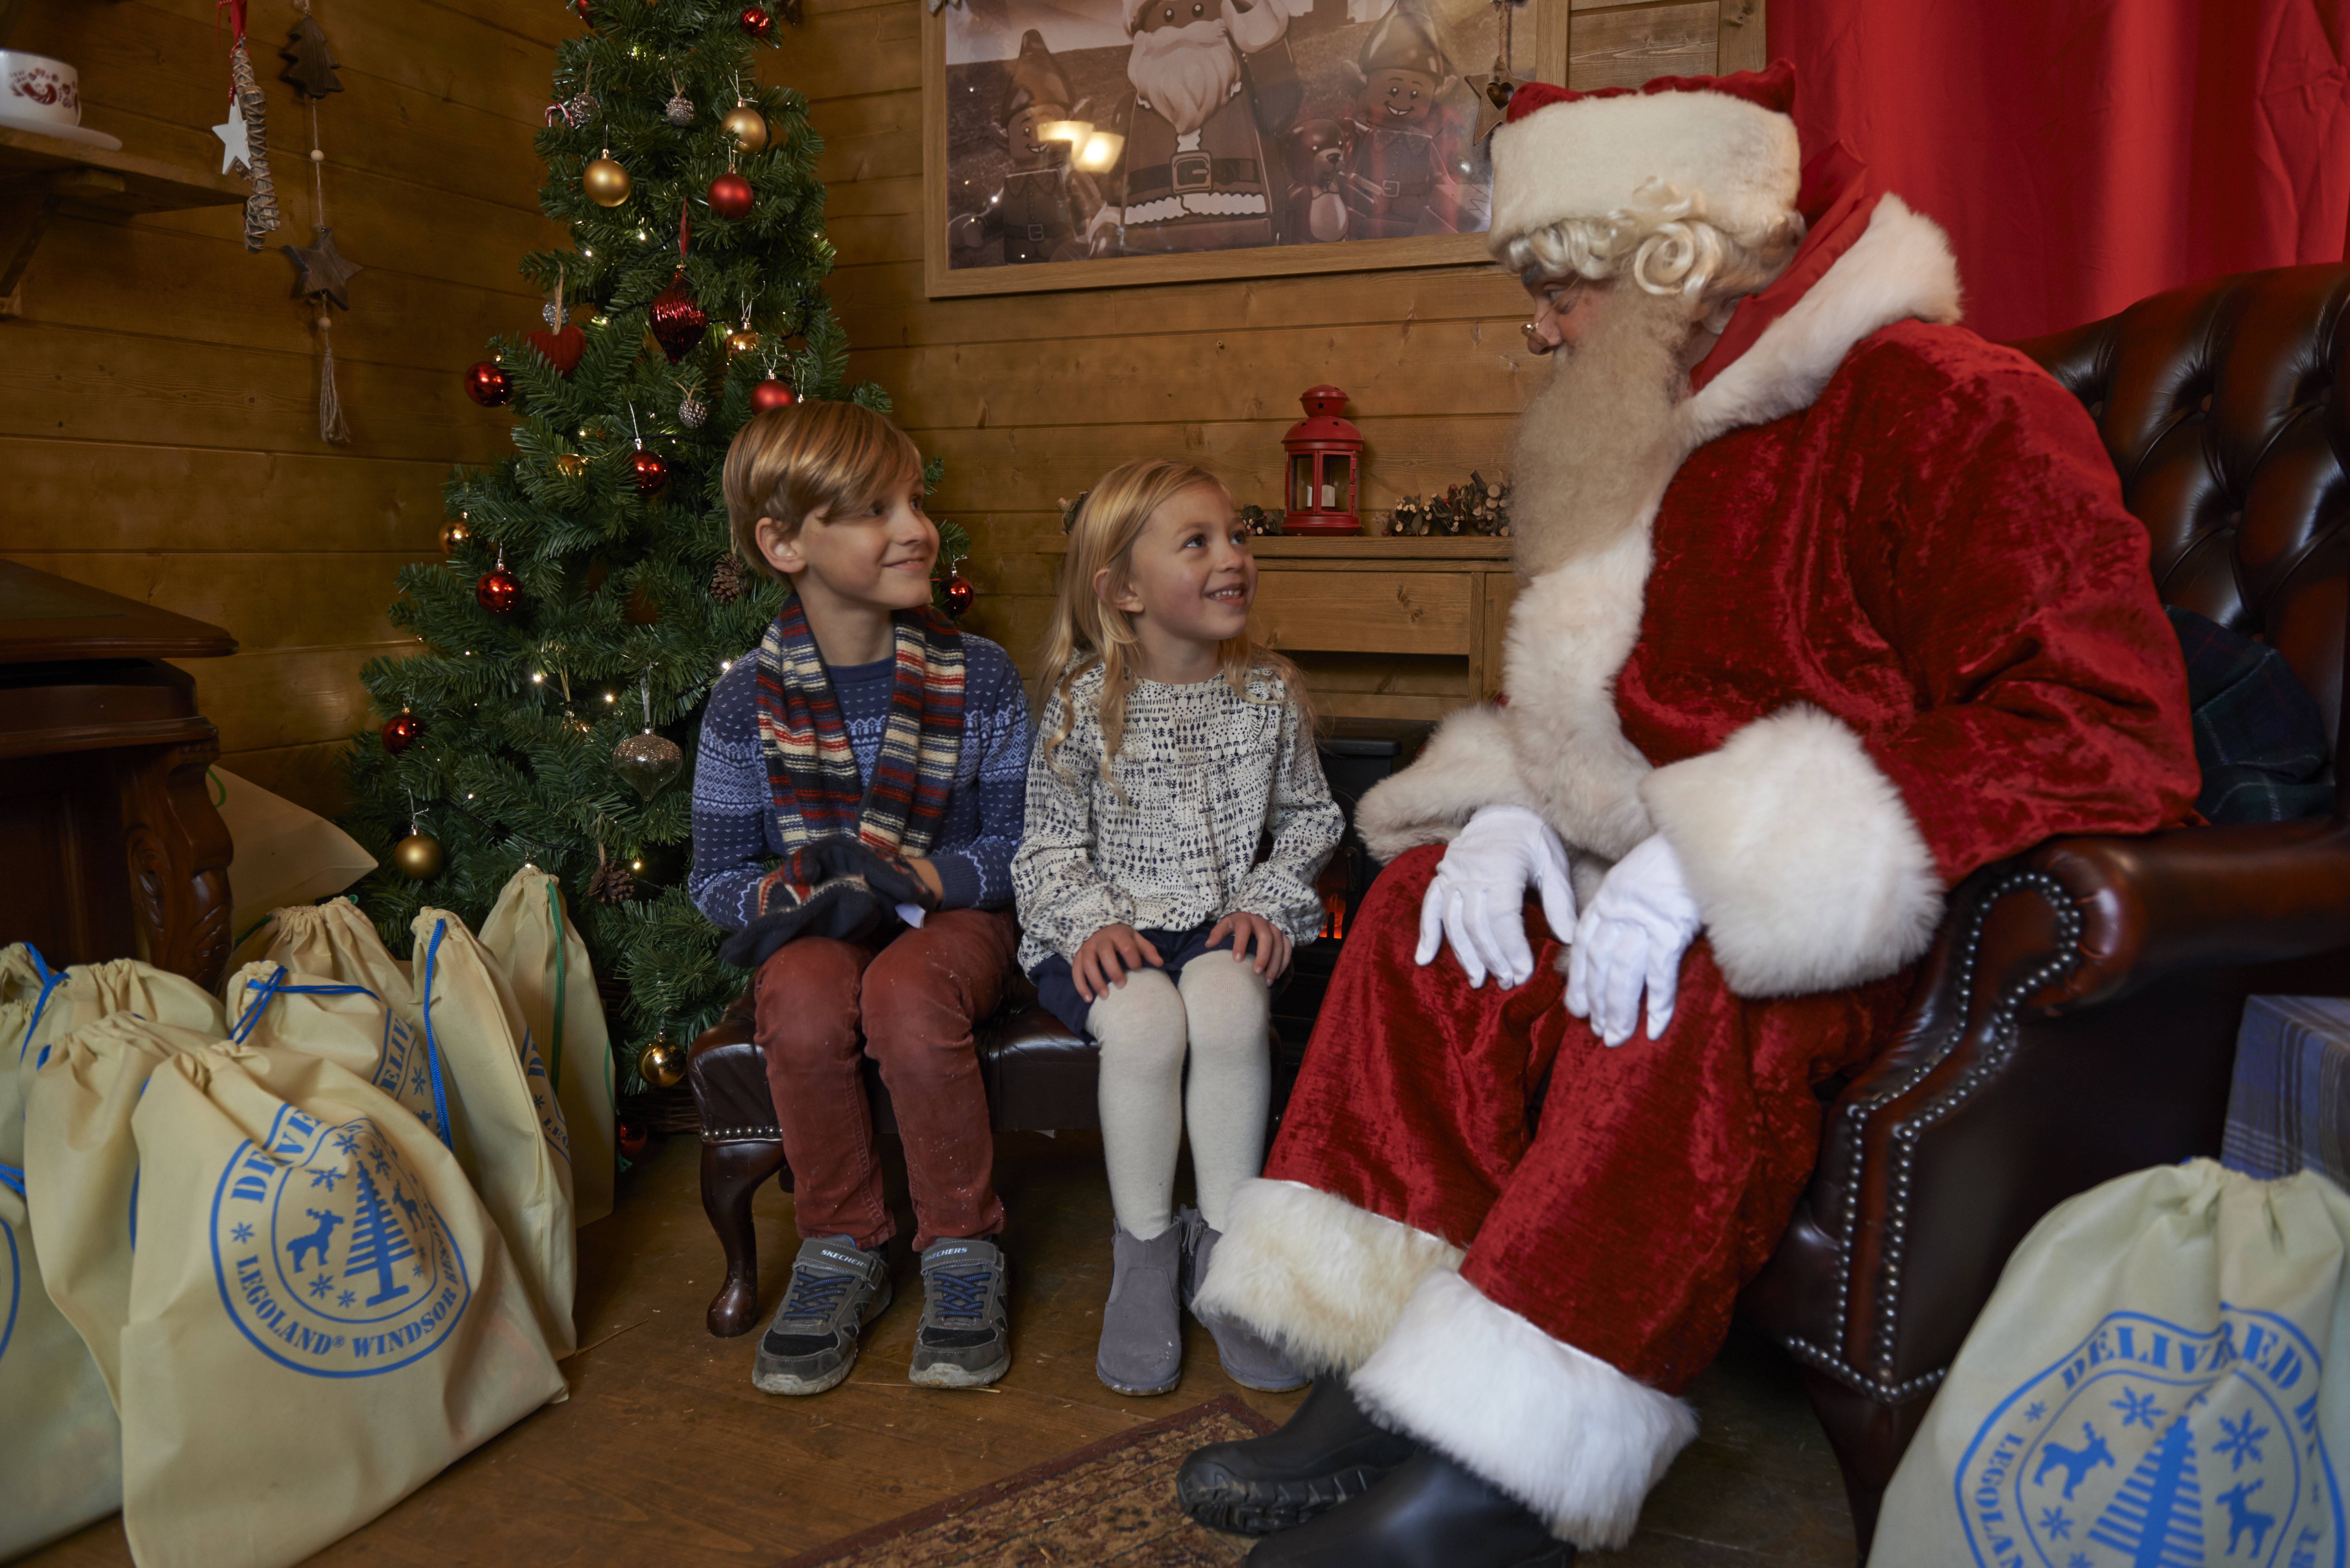 Children Meeting Father Christmas in his magical grotto at LEGOLAND at Christmas at the LEGOLAND Windsor Resort